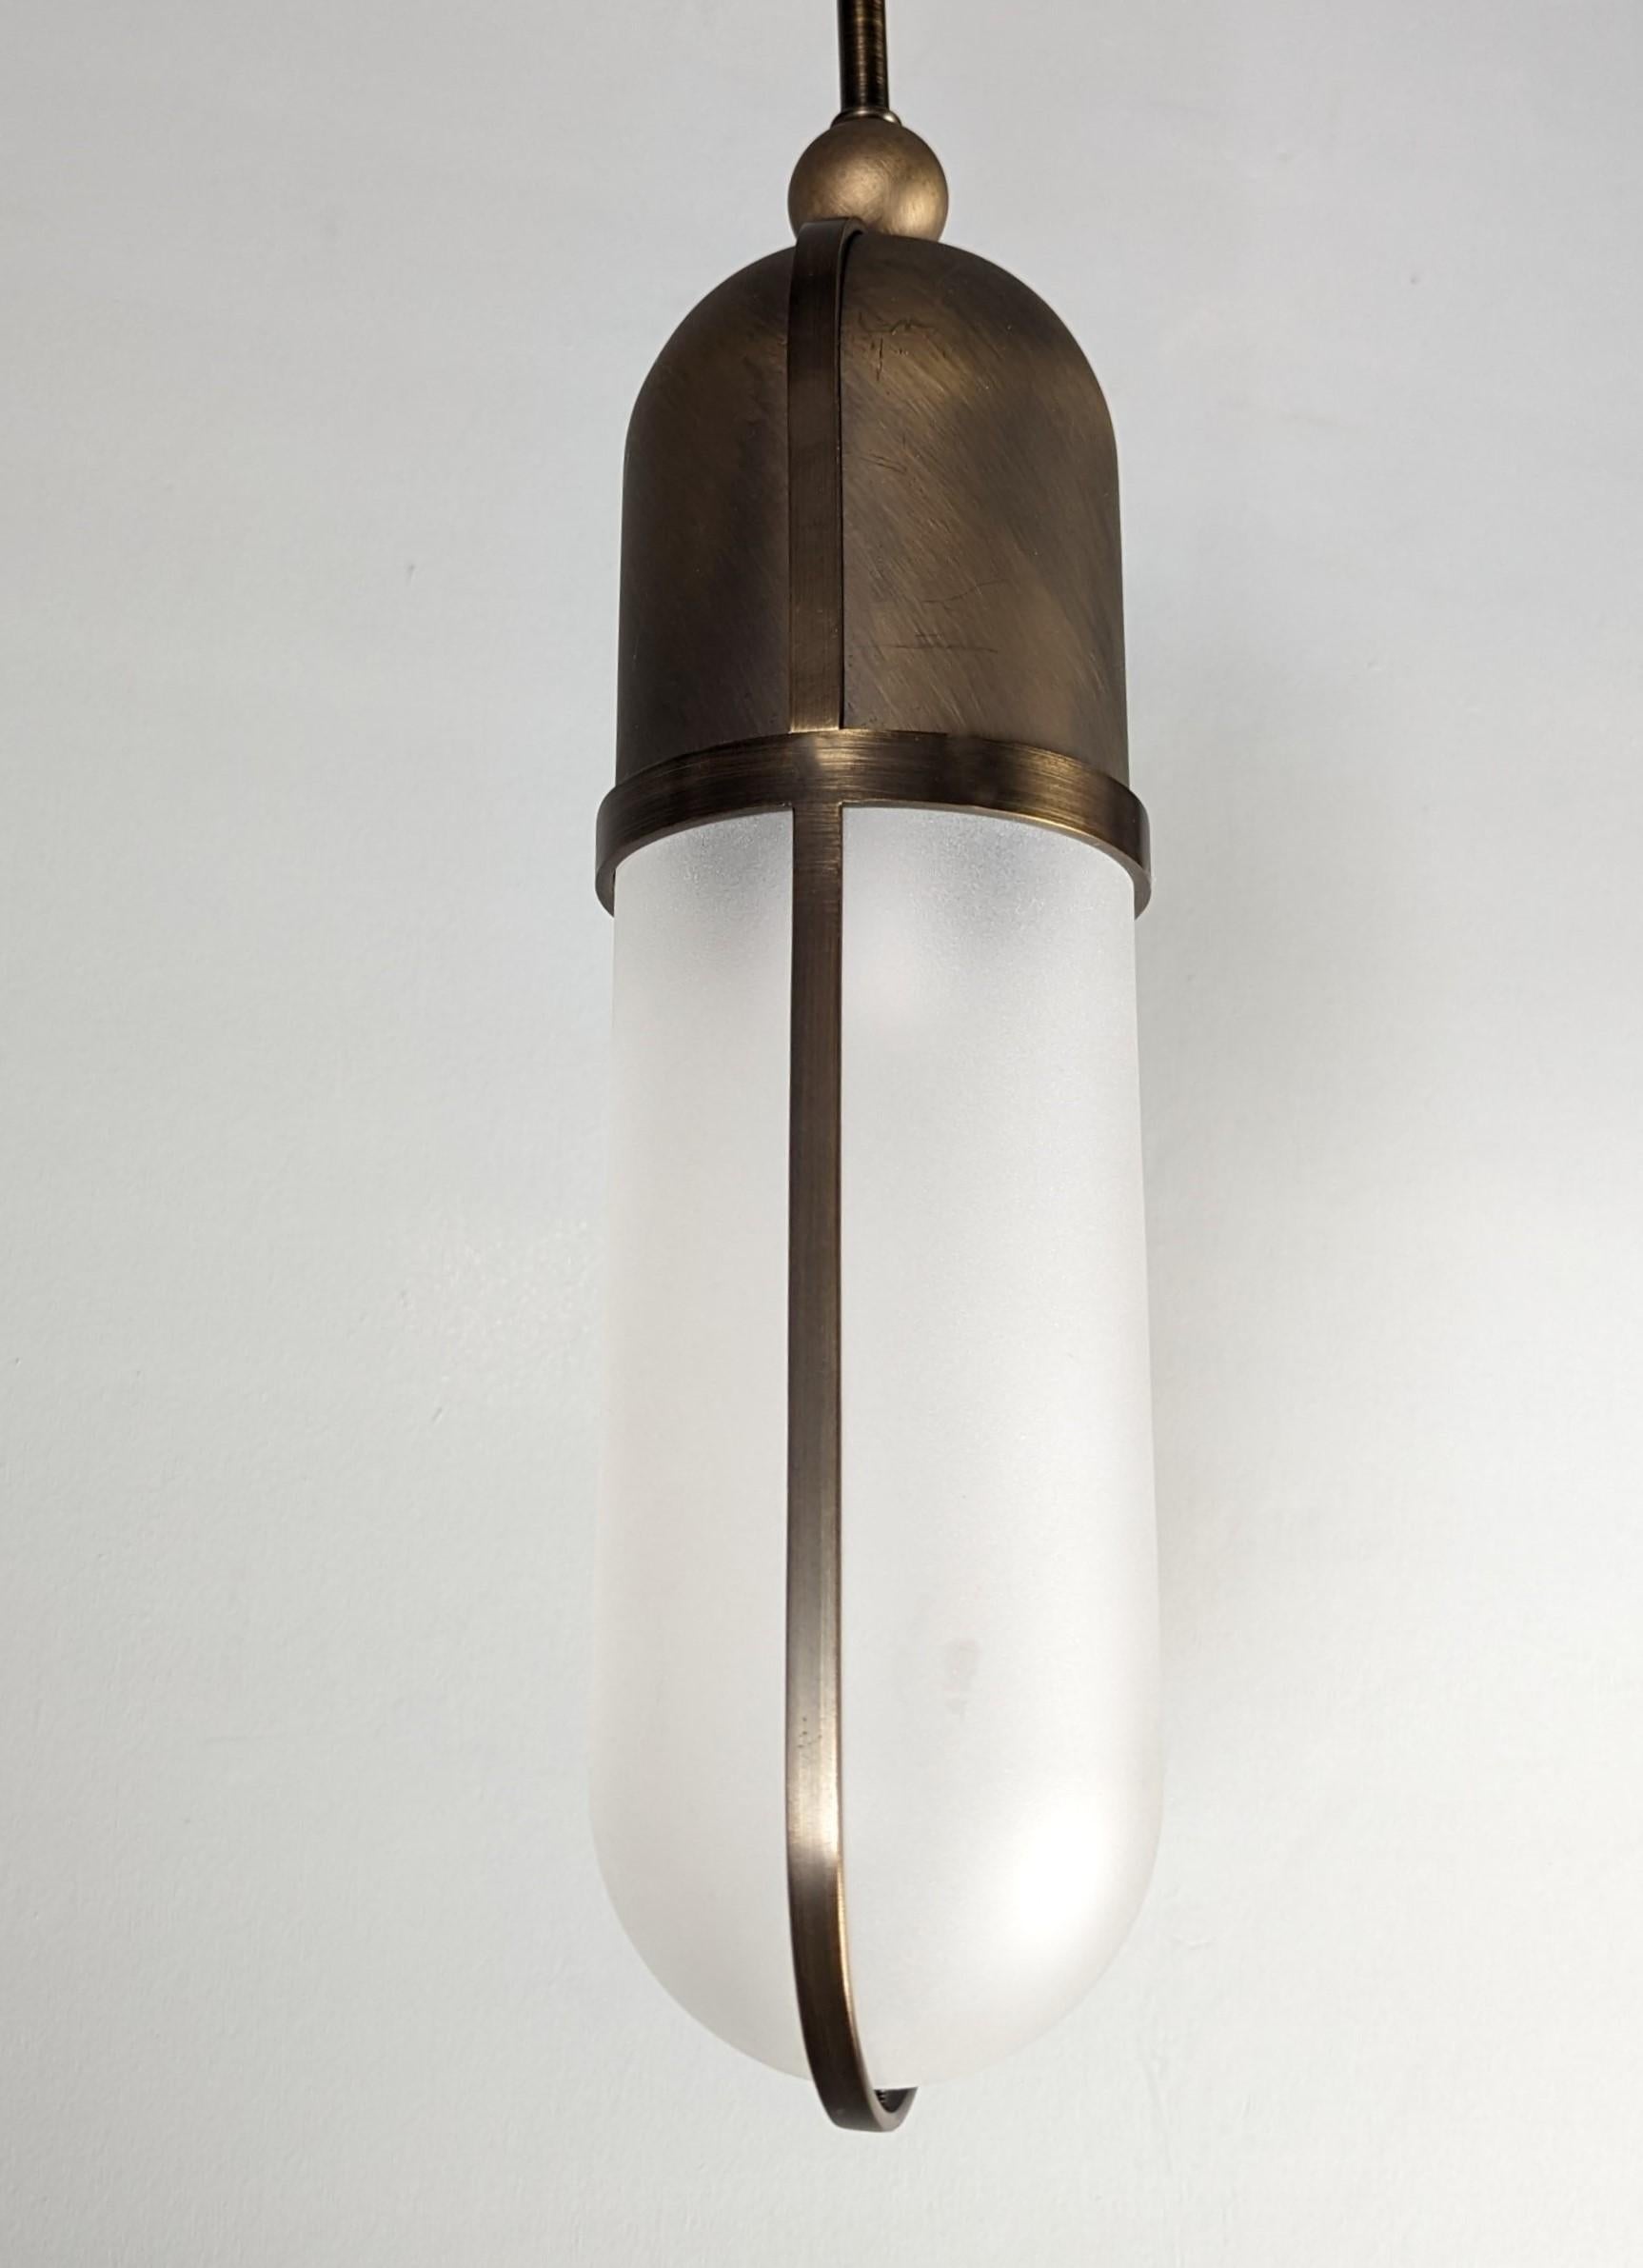 Inspiration for this pendant lamp is taken from “The Century Building” Lobby in New York. This collection is crafted from vertical rounded linear bronze frame with glass and brass shade insert to either sides. Sleek and elegant antique bronze and